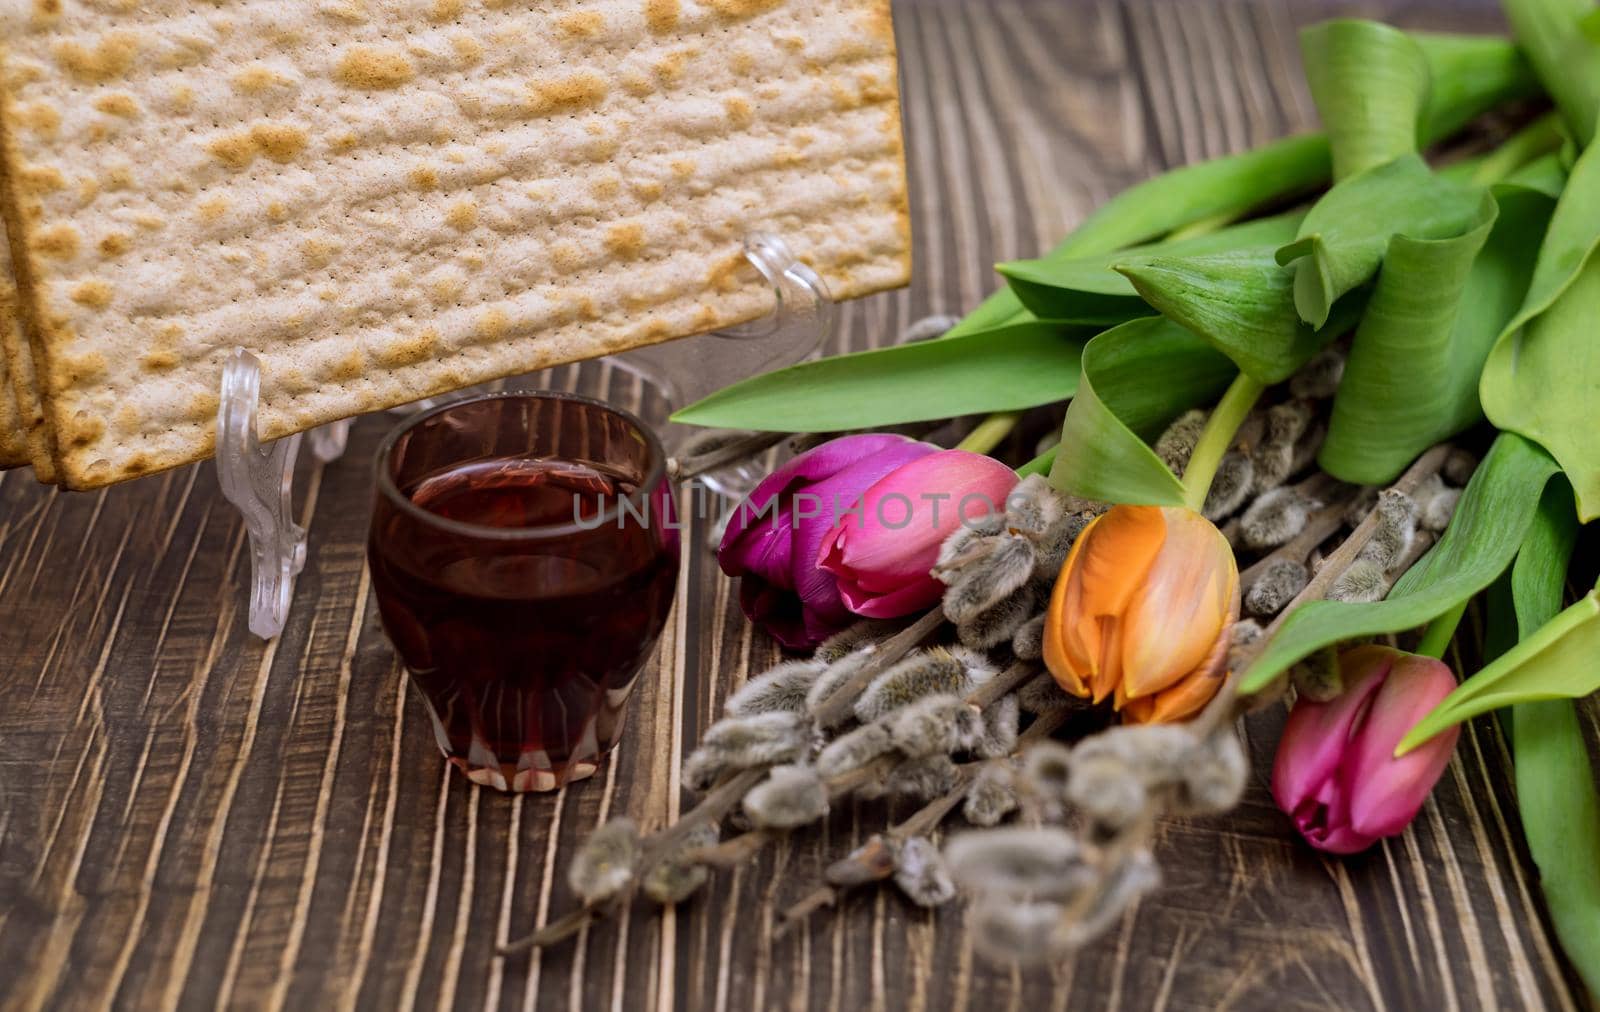 Passover celebration Jewish traditional holiday of kosher wine and matzah bread on Pesach for the ceremony ritual blessings